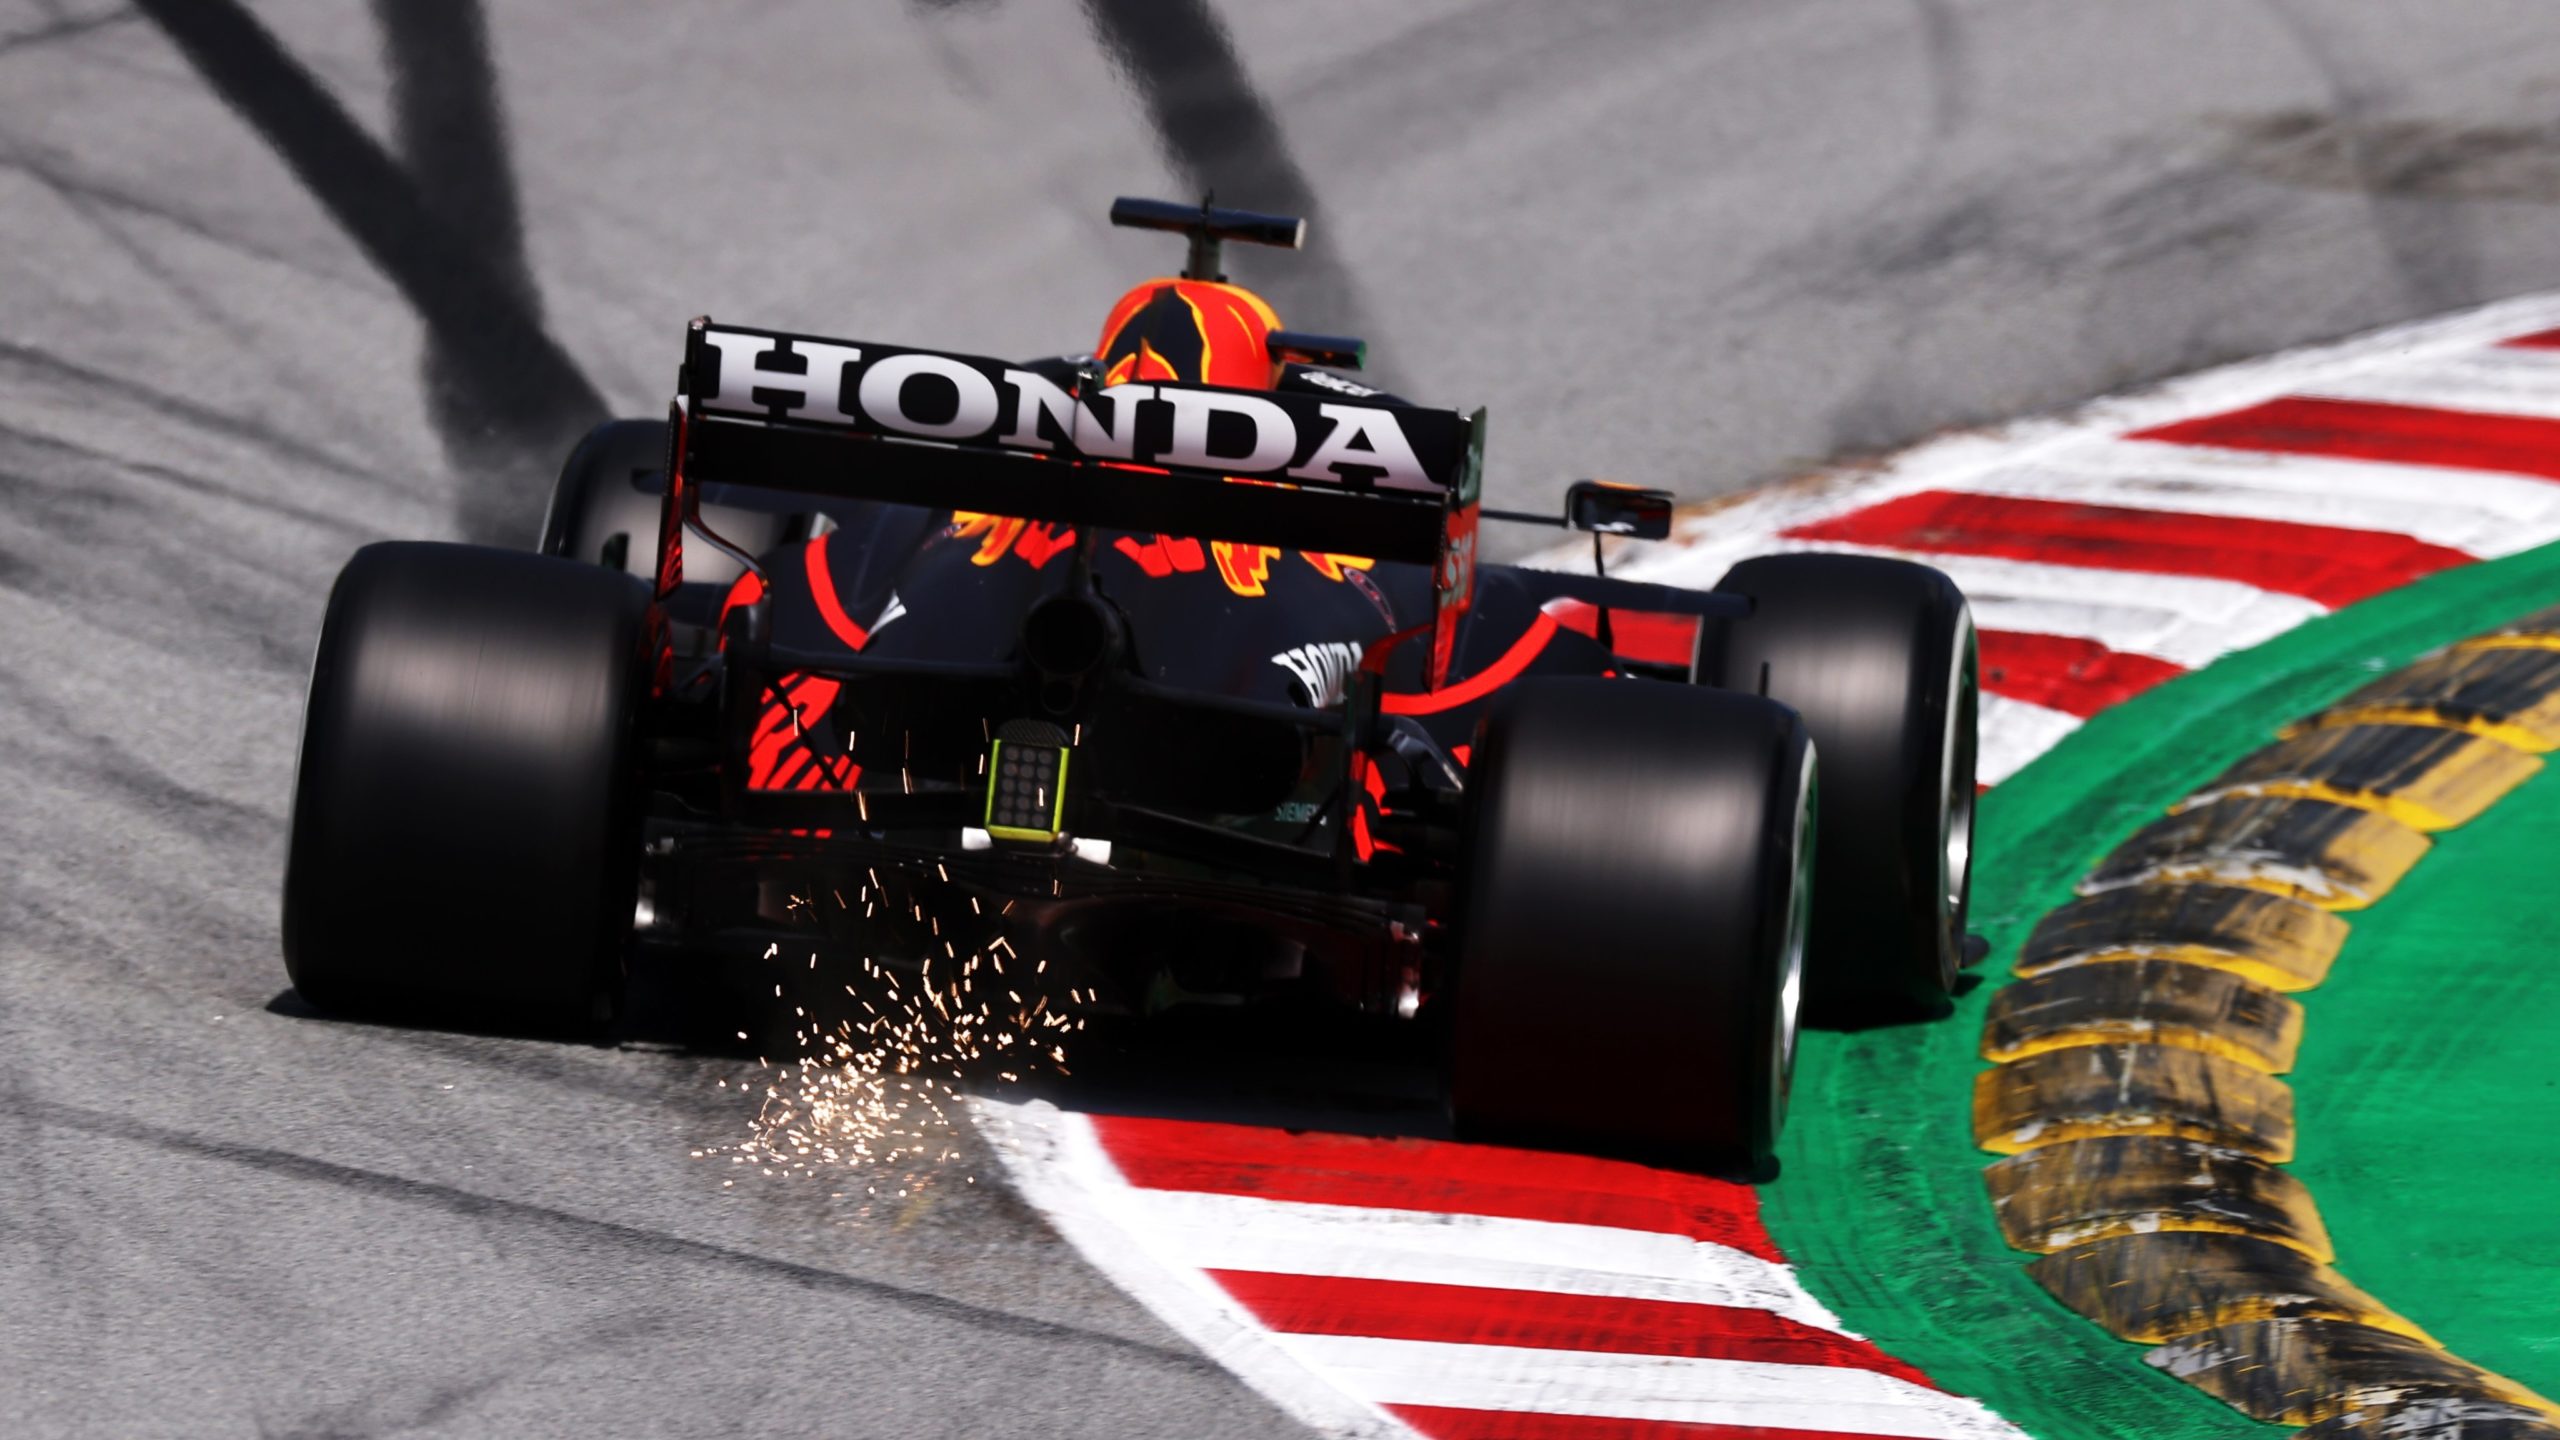 Marko was frustrated by the damage of Verstappen's front wing during Spanish GP